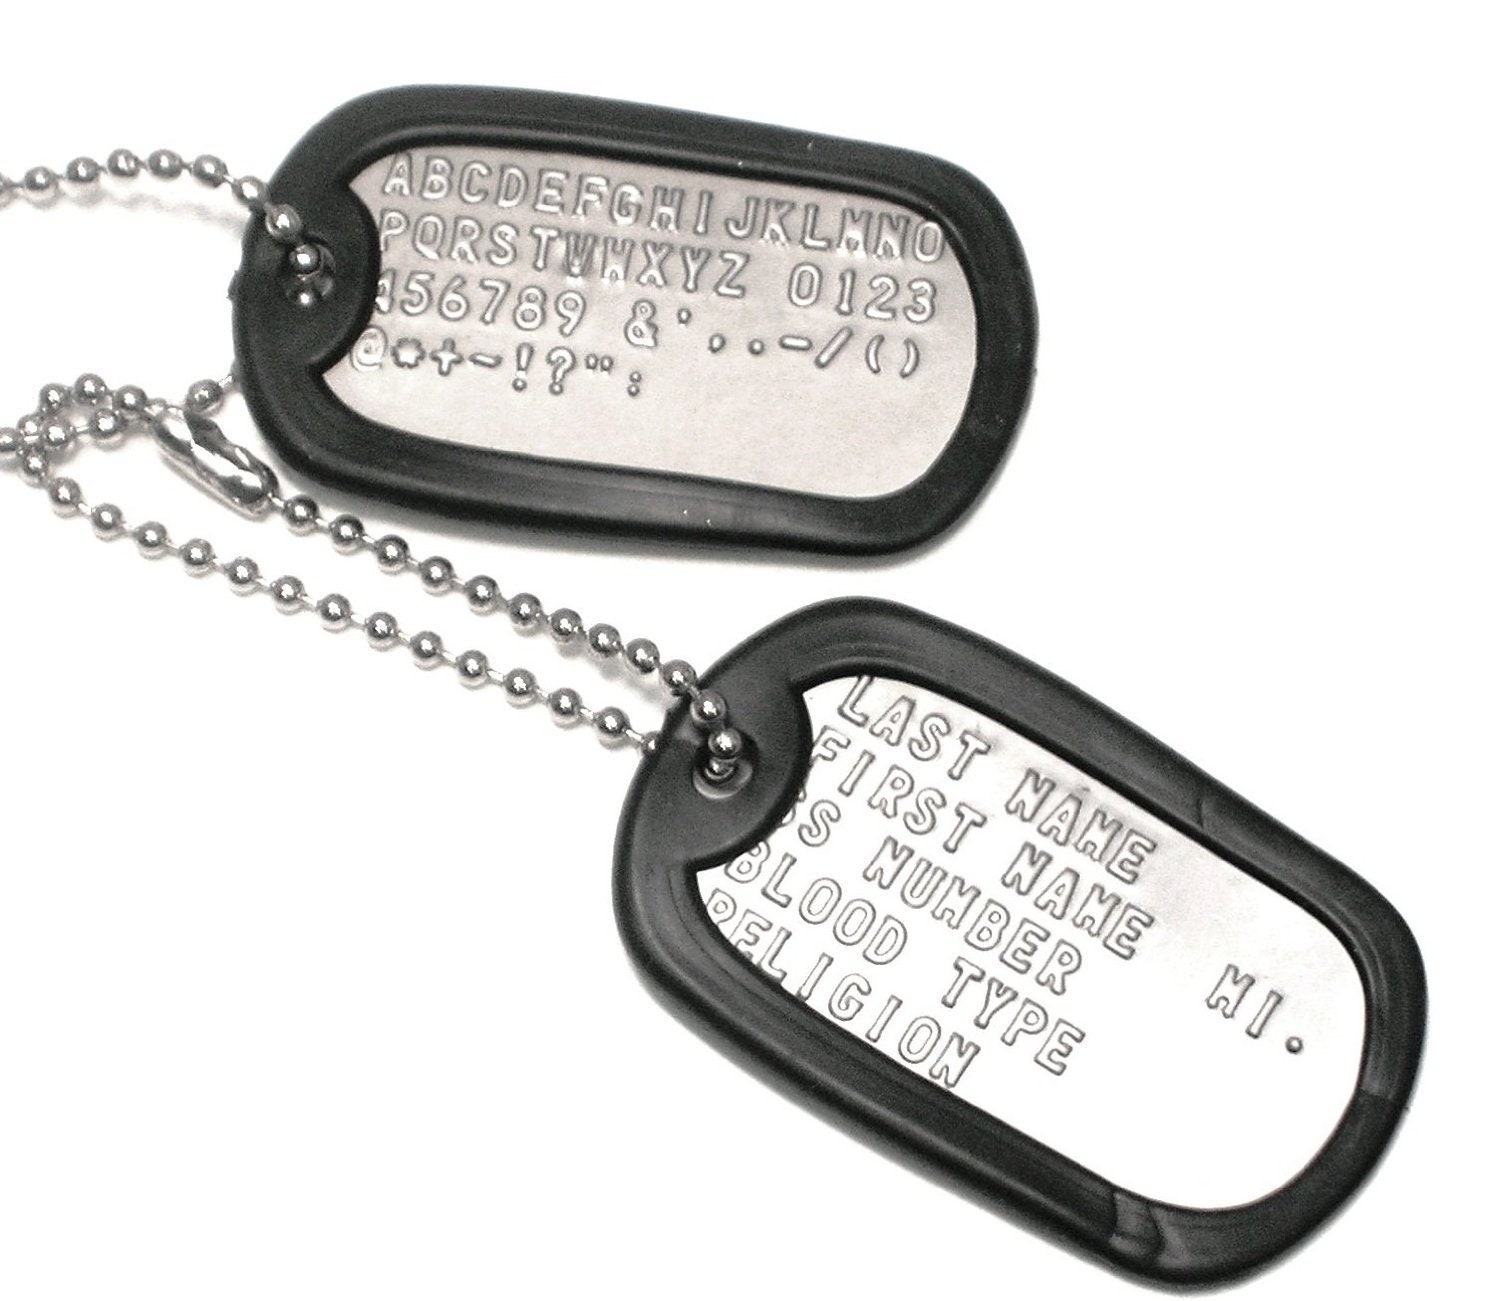 Stainless Steel Dog Tags 1 3/4 X 1 X 1/8 Thick Blanks, 8 Gauge, Heavy Duty  Blank, Hand Stamping, Engraving Supplies 